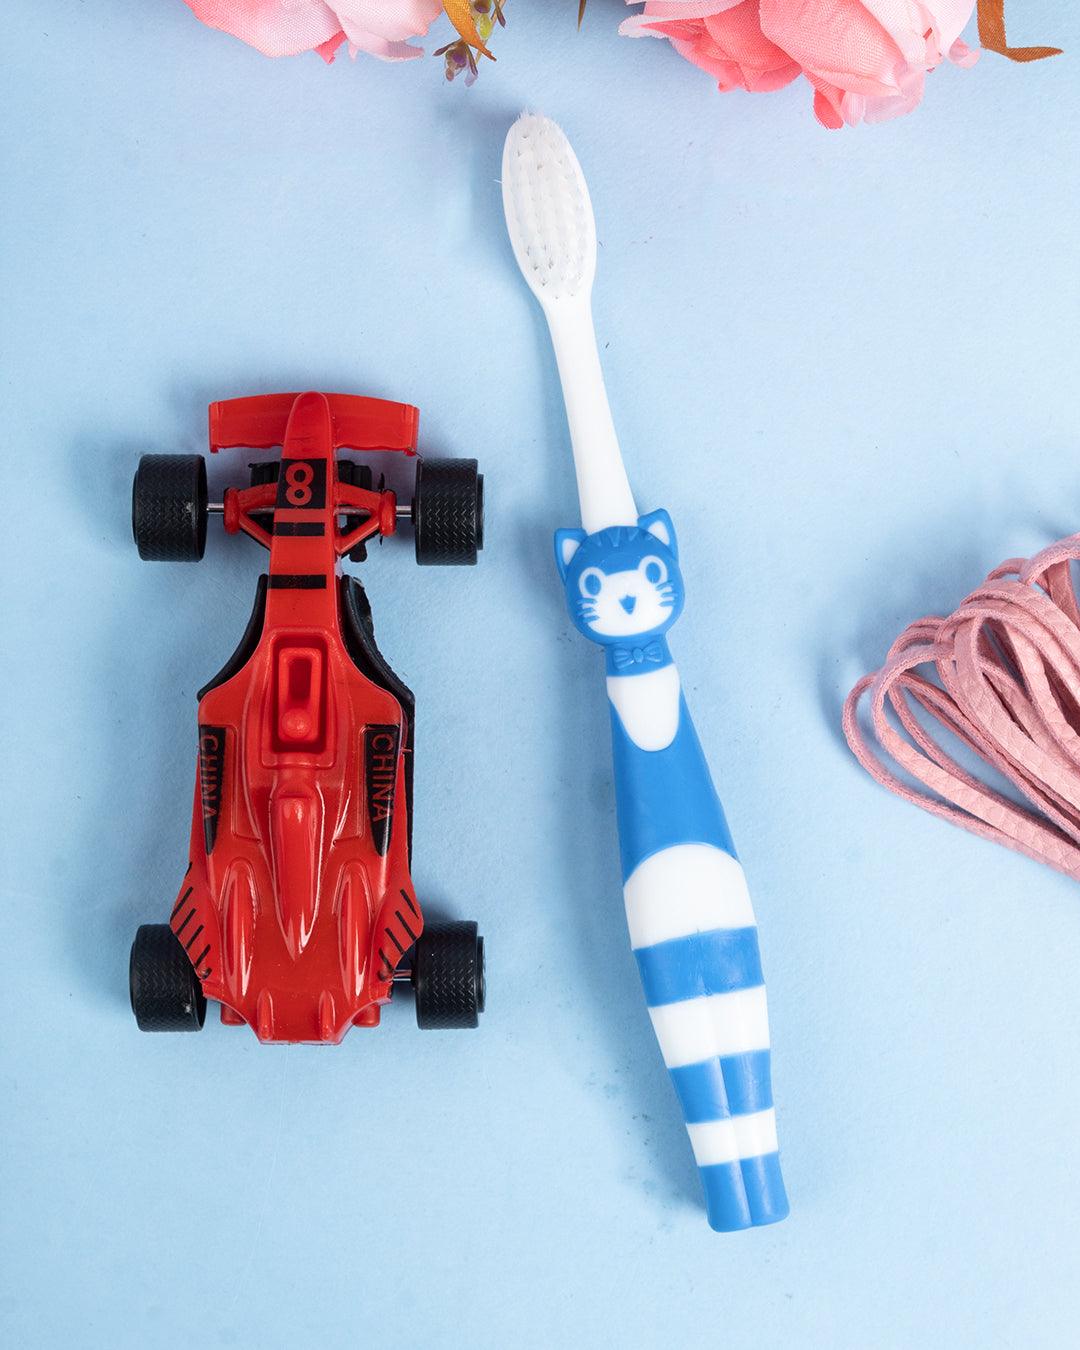 Soft Bristles Kid Compact Toothbrush with Toy Car, Red, Plastic - MARKET 99